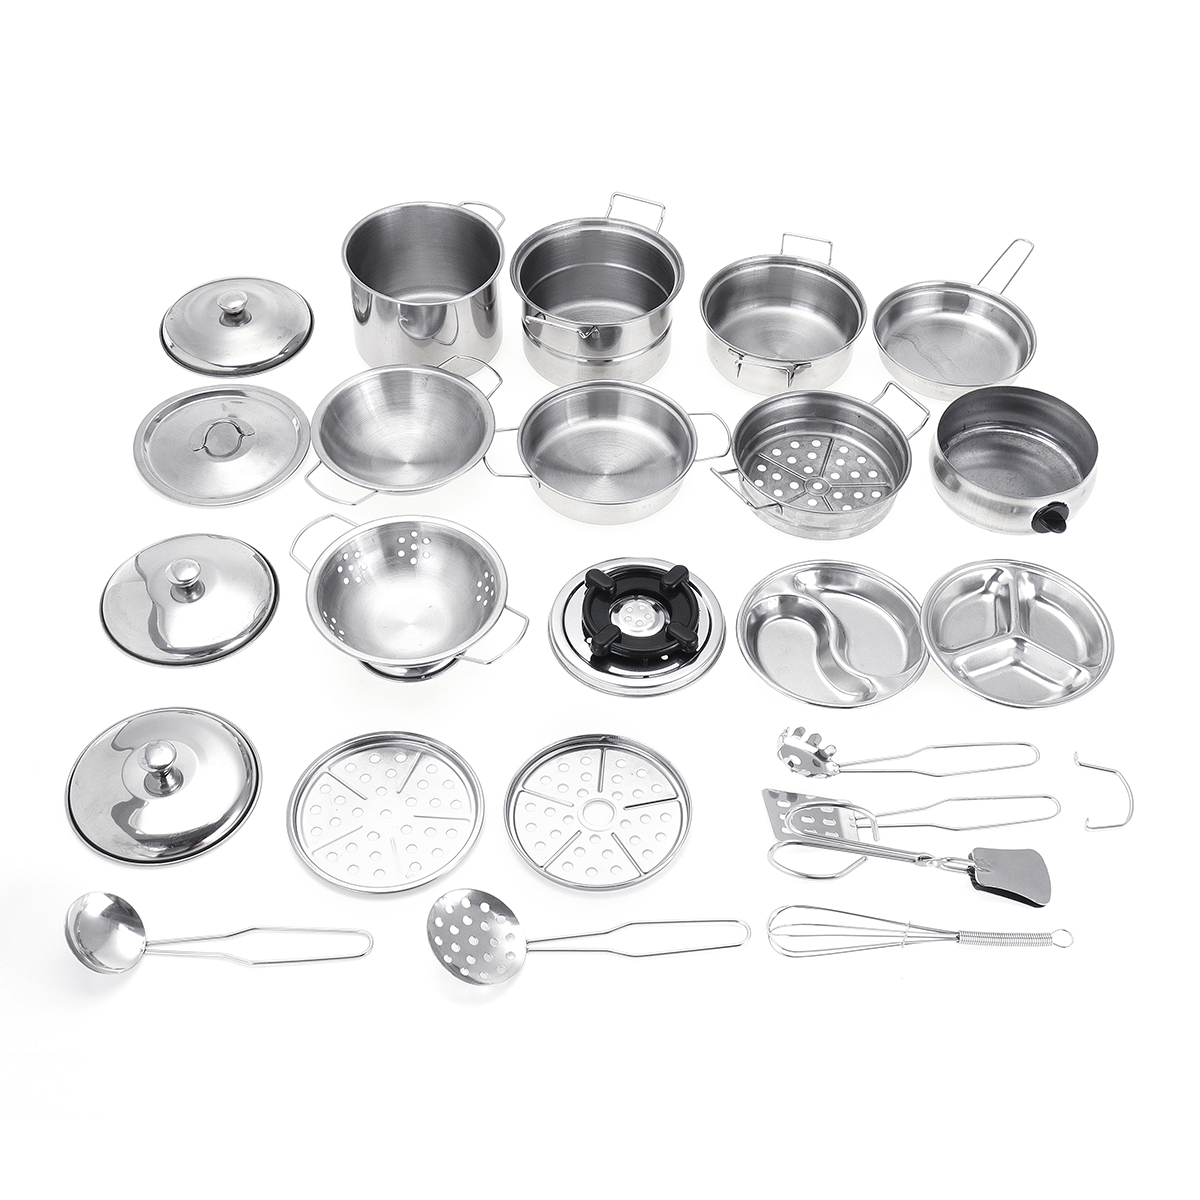 32PCS-Mini-Stainless-Steel-Kitchen-Cutlery-Play-House-Food-Toy-Boiler-Kettle-Cup-Bowl-Spoon-Cookware-1423237-6